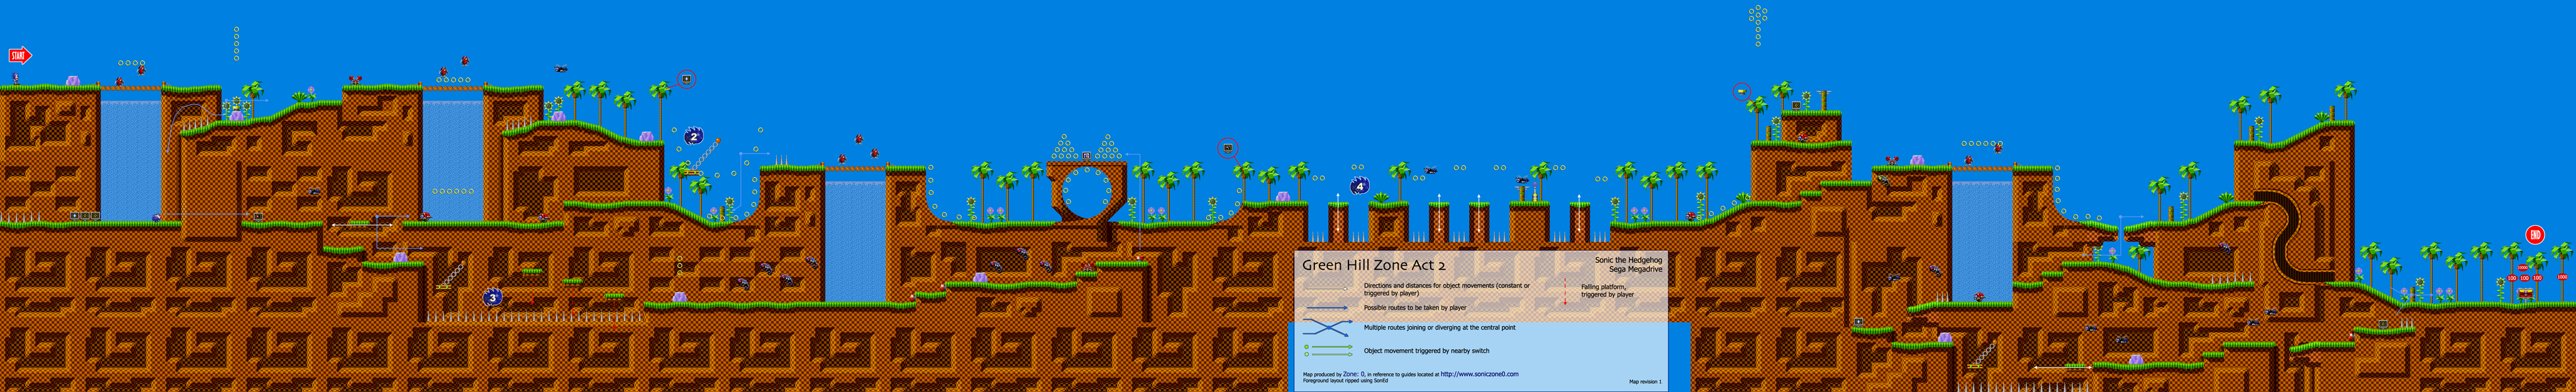 Green Hill Zone Act 1 - Sonic the Hedgehog